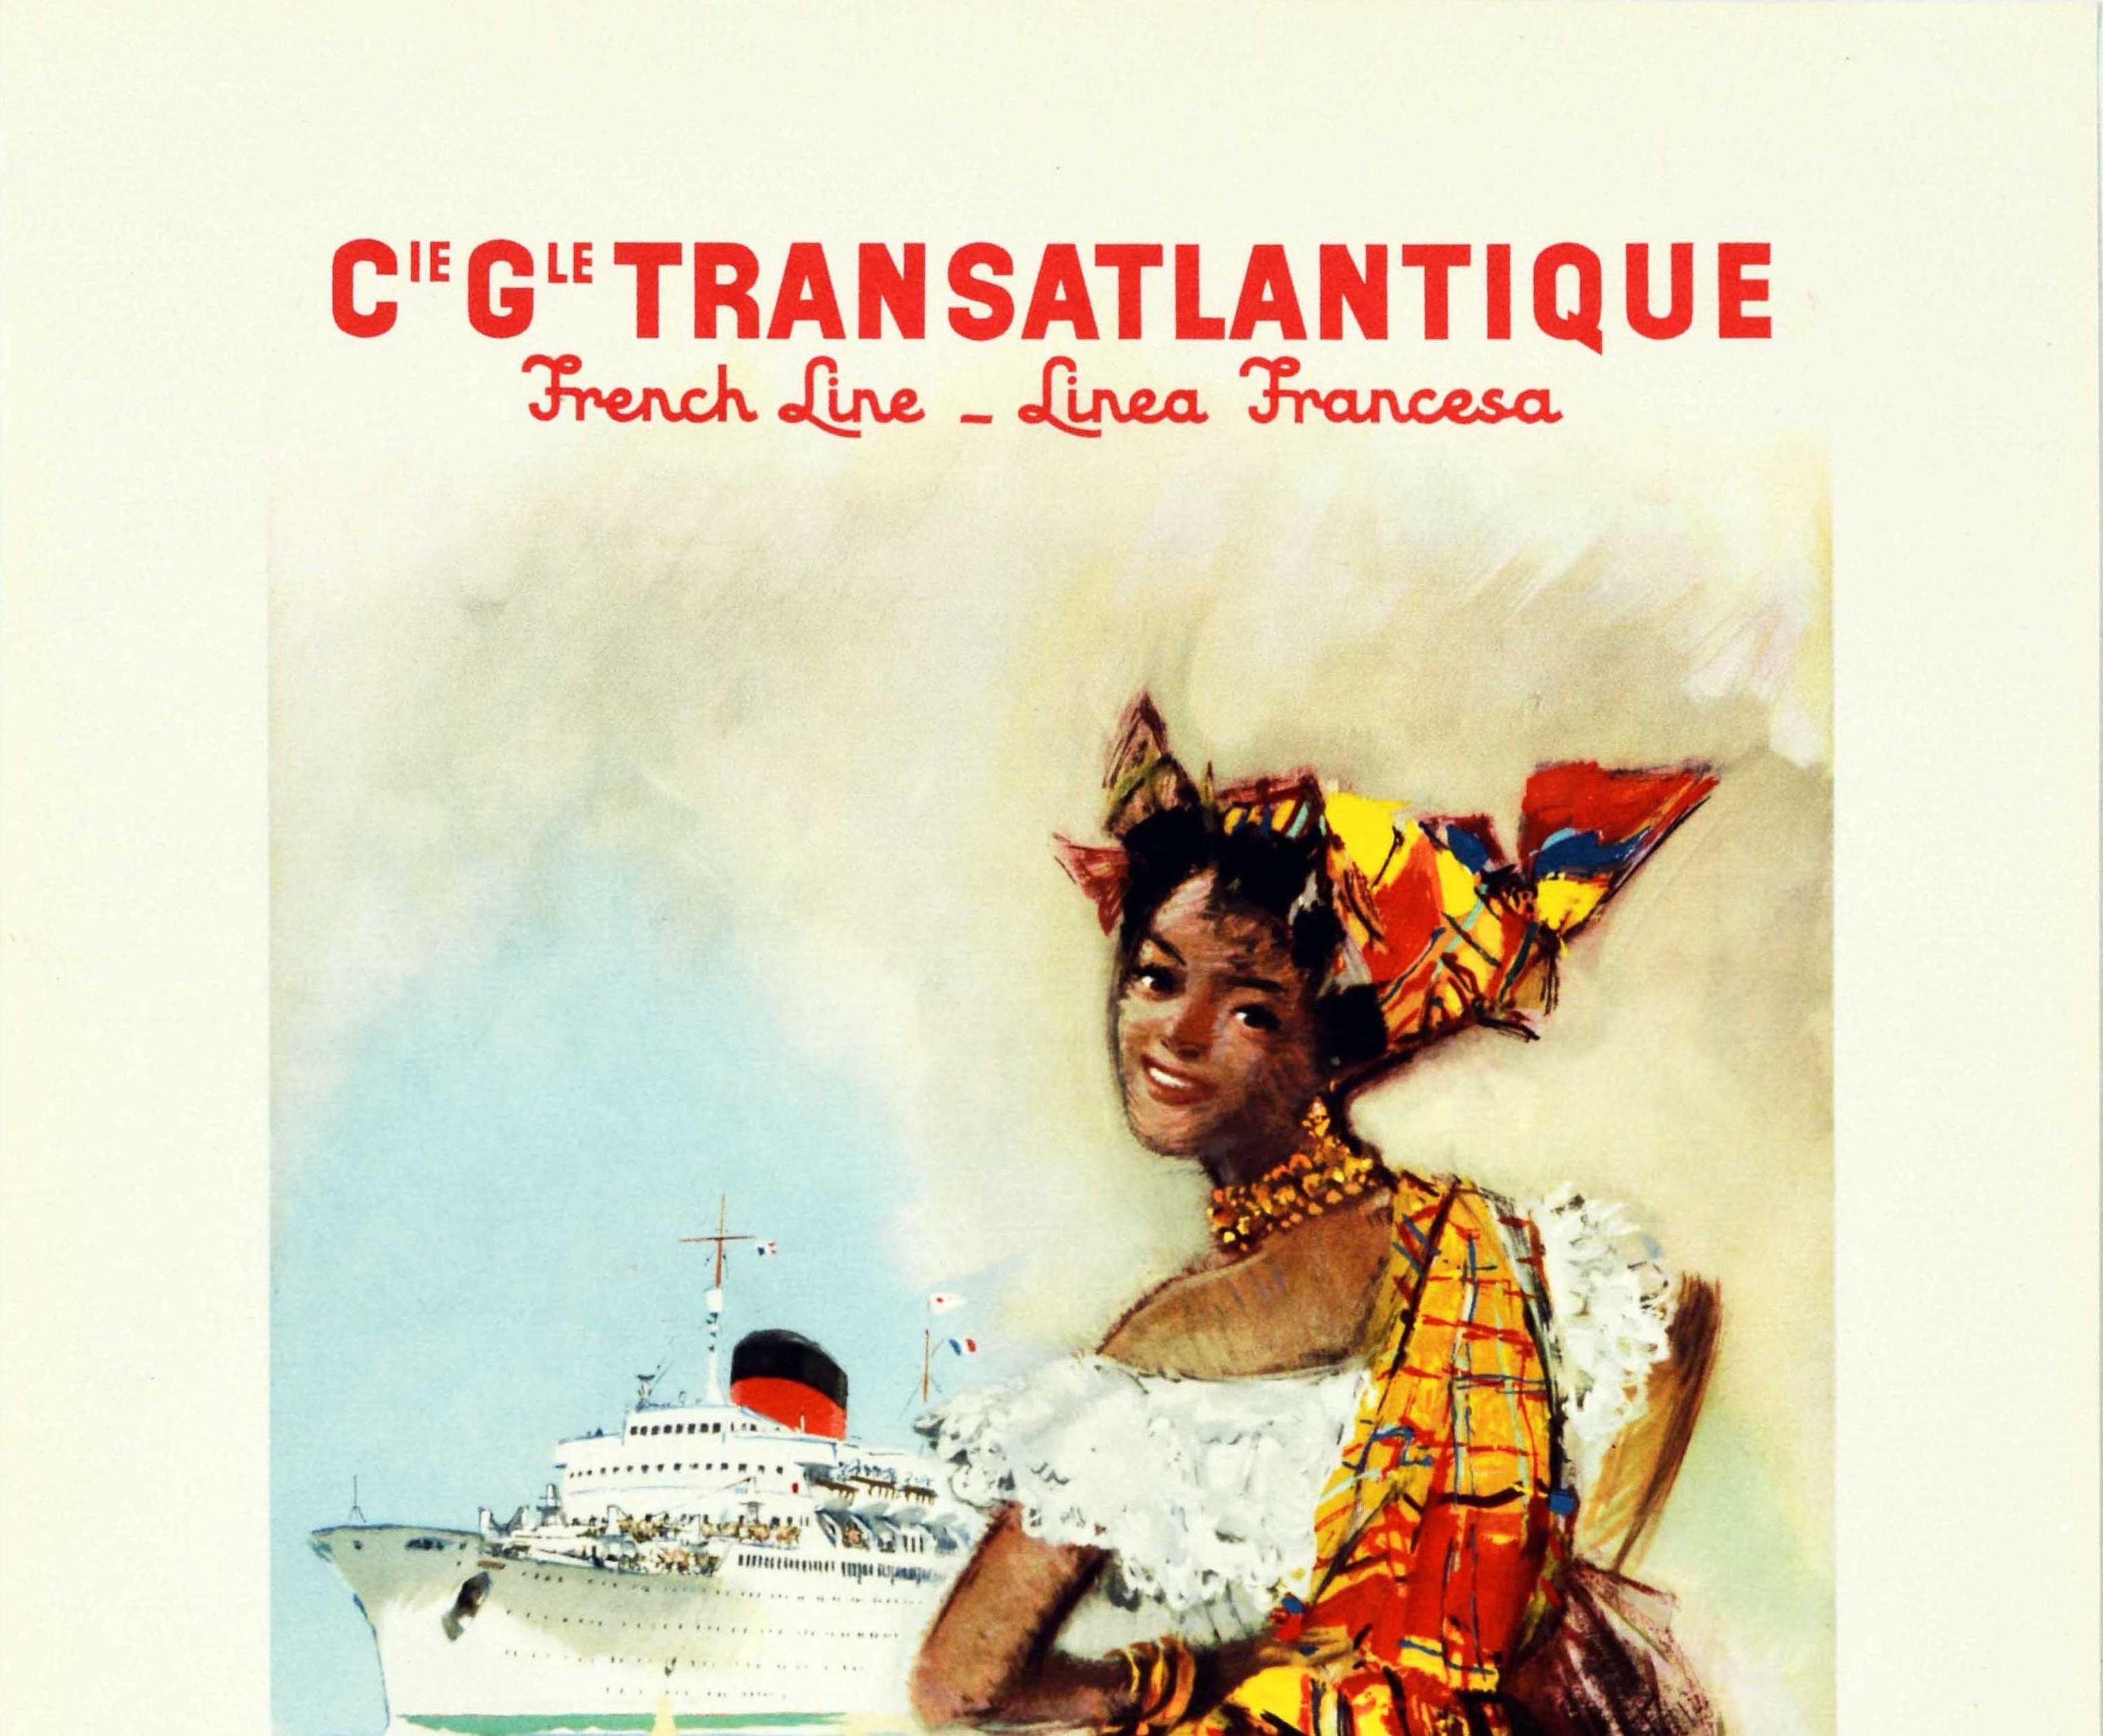 Original vintage cruise travel poster advertising the Cie Gle Transatlantique French Line Linea Francesa Antilles Venezuela featuring artwork by the French artist Albert Brenet (1903-2005) depicting a young smiling lady in traditional clothing and